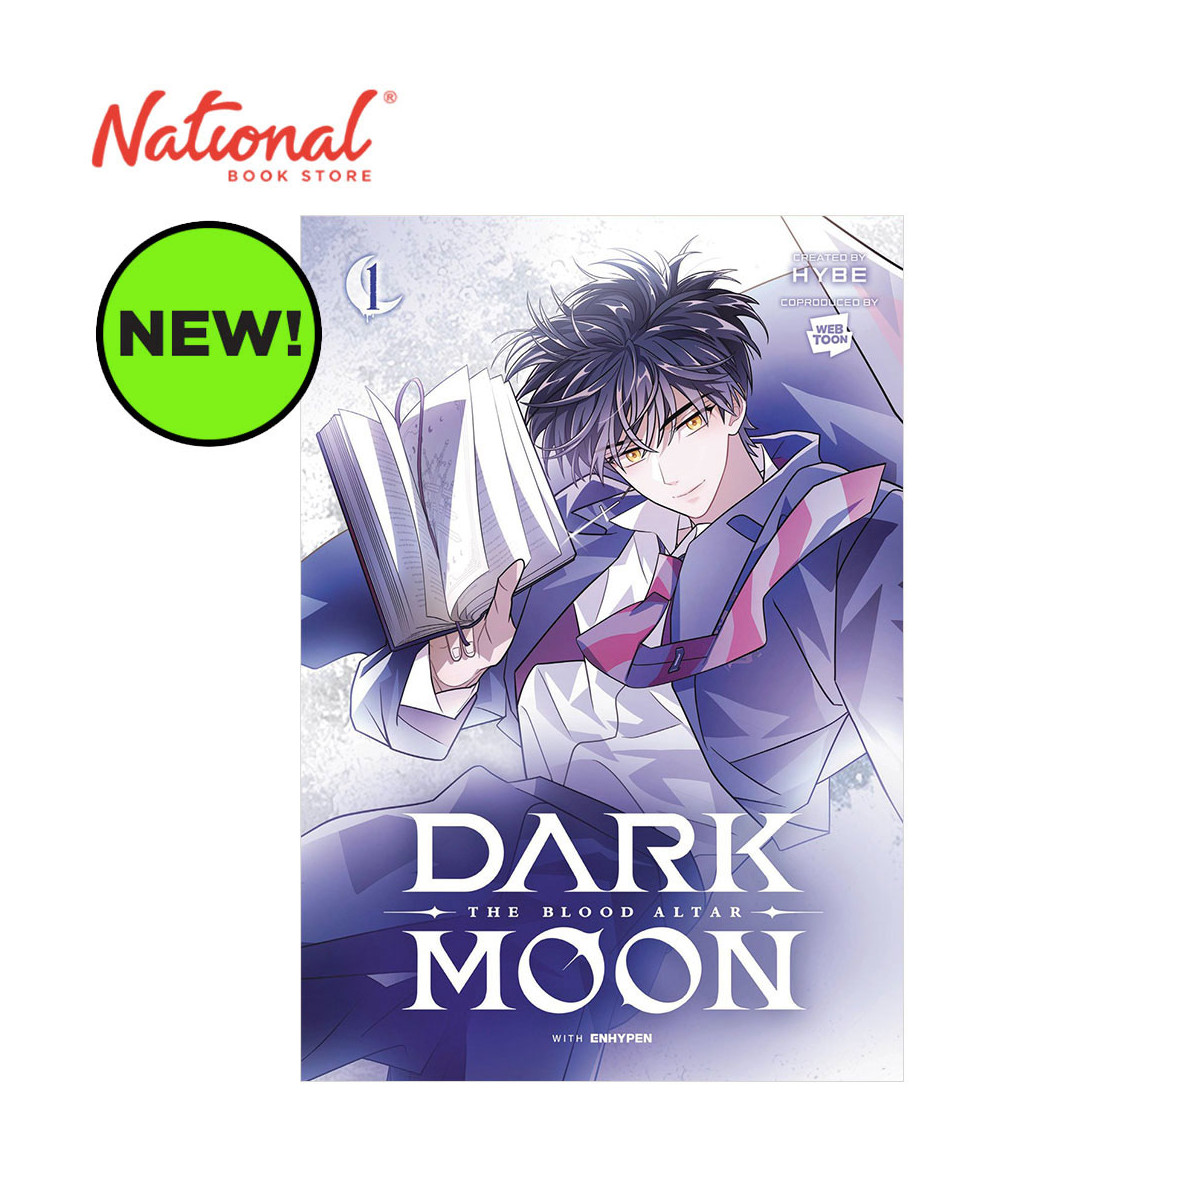 *SPECIAL ORDER* Dark Moon: The Blood Altar Volume 1 by Hybe with Enhypen - Trade Paperback - Teens Comics